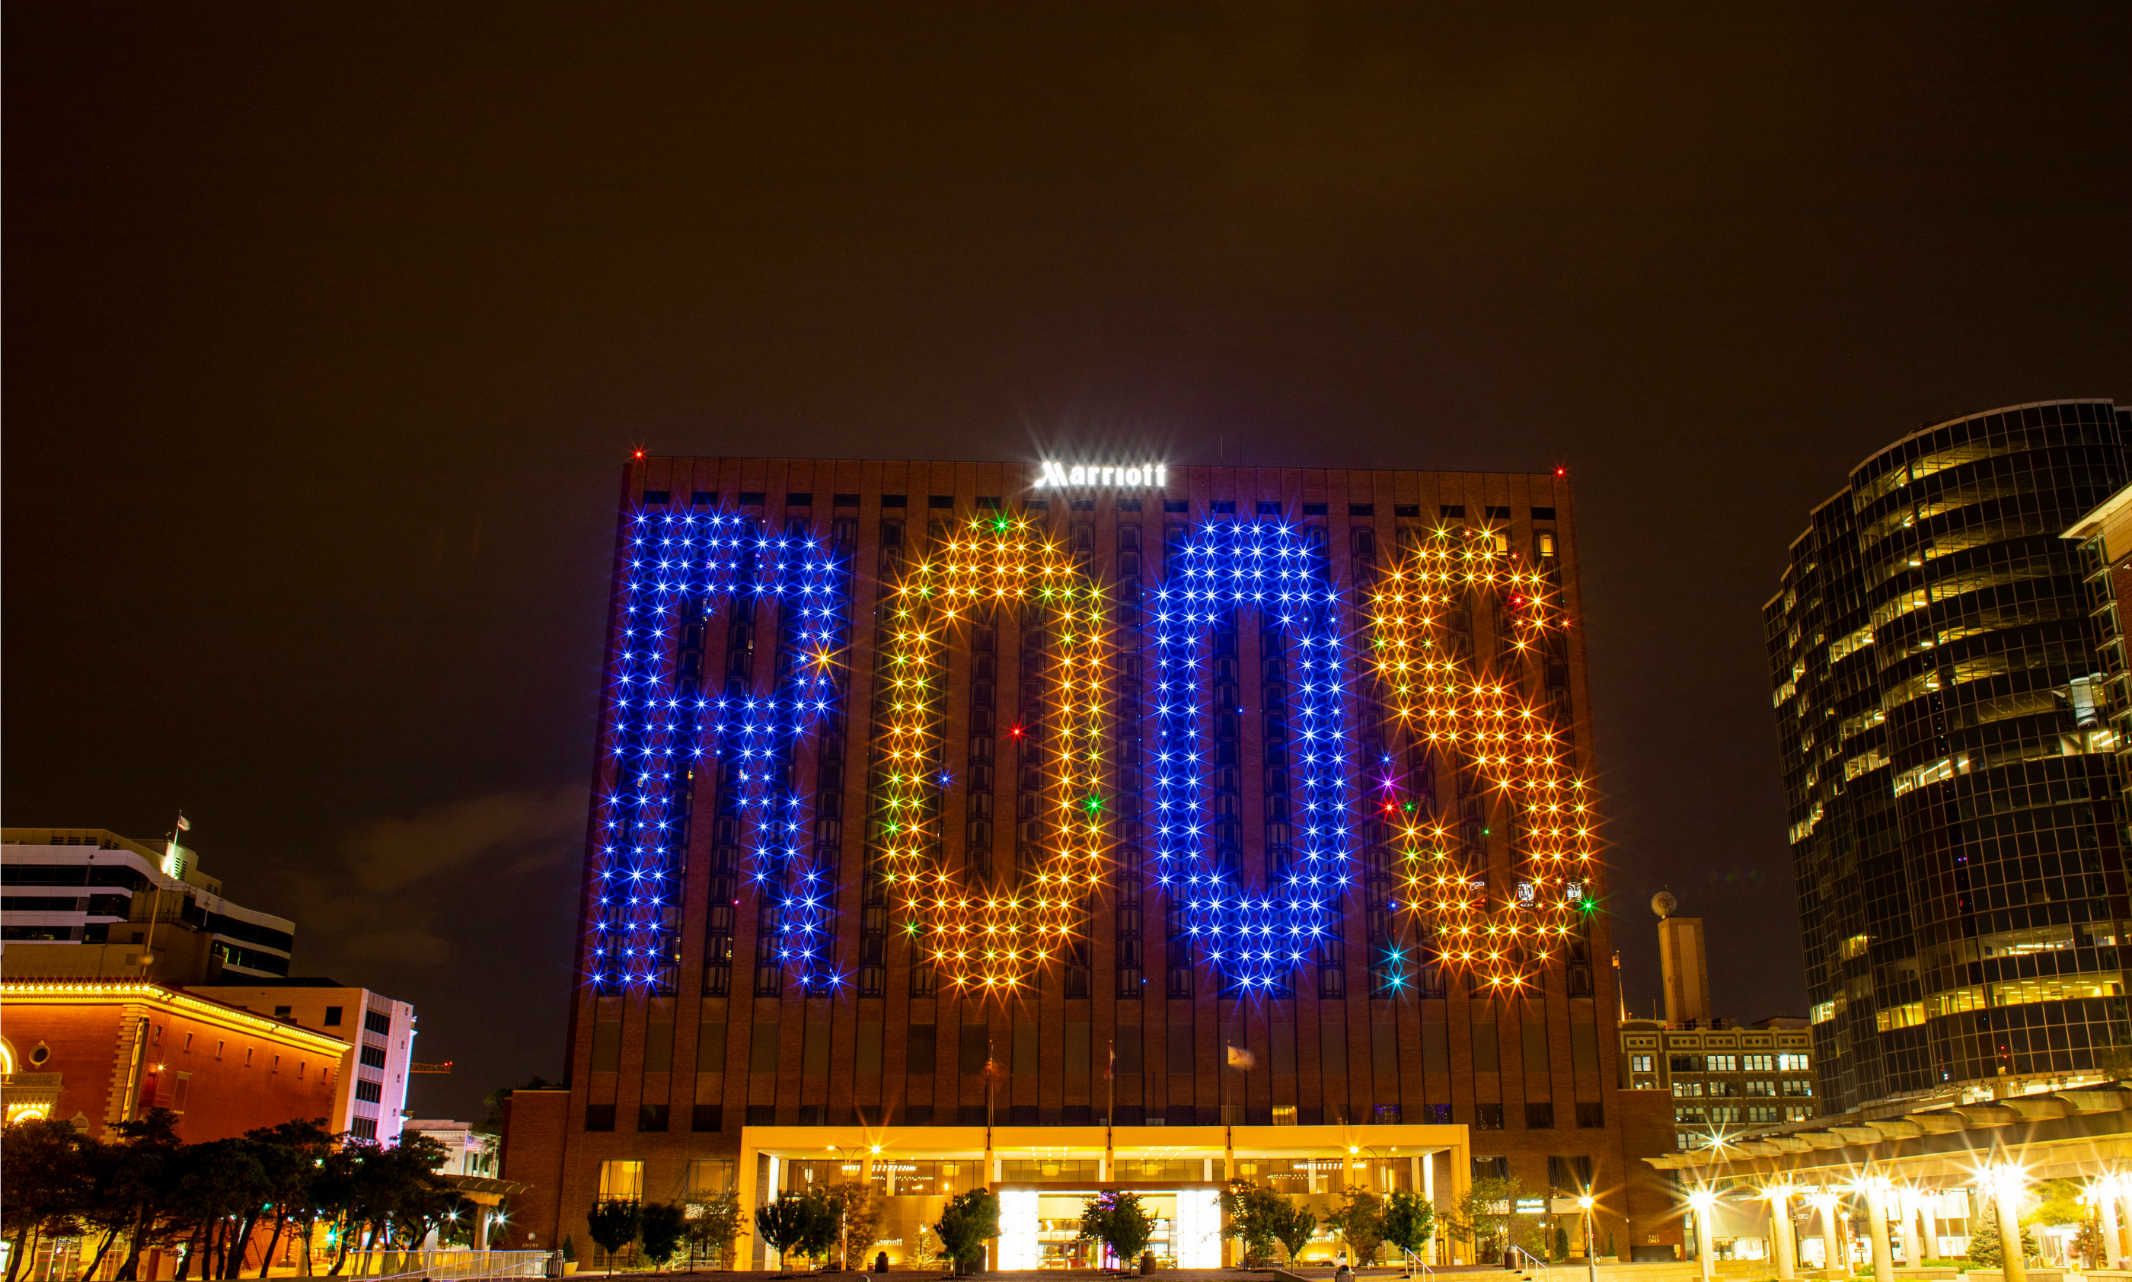 Photo of Marriott Holtel in downtown Kansas City lit up blue and gold with ROOS on the outside of the building